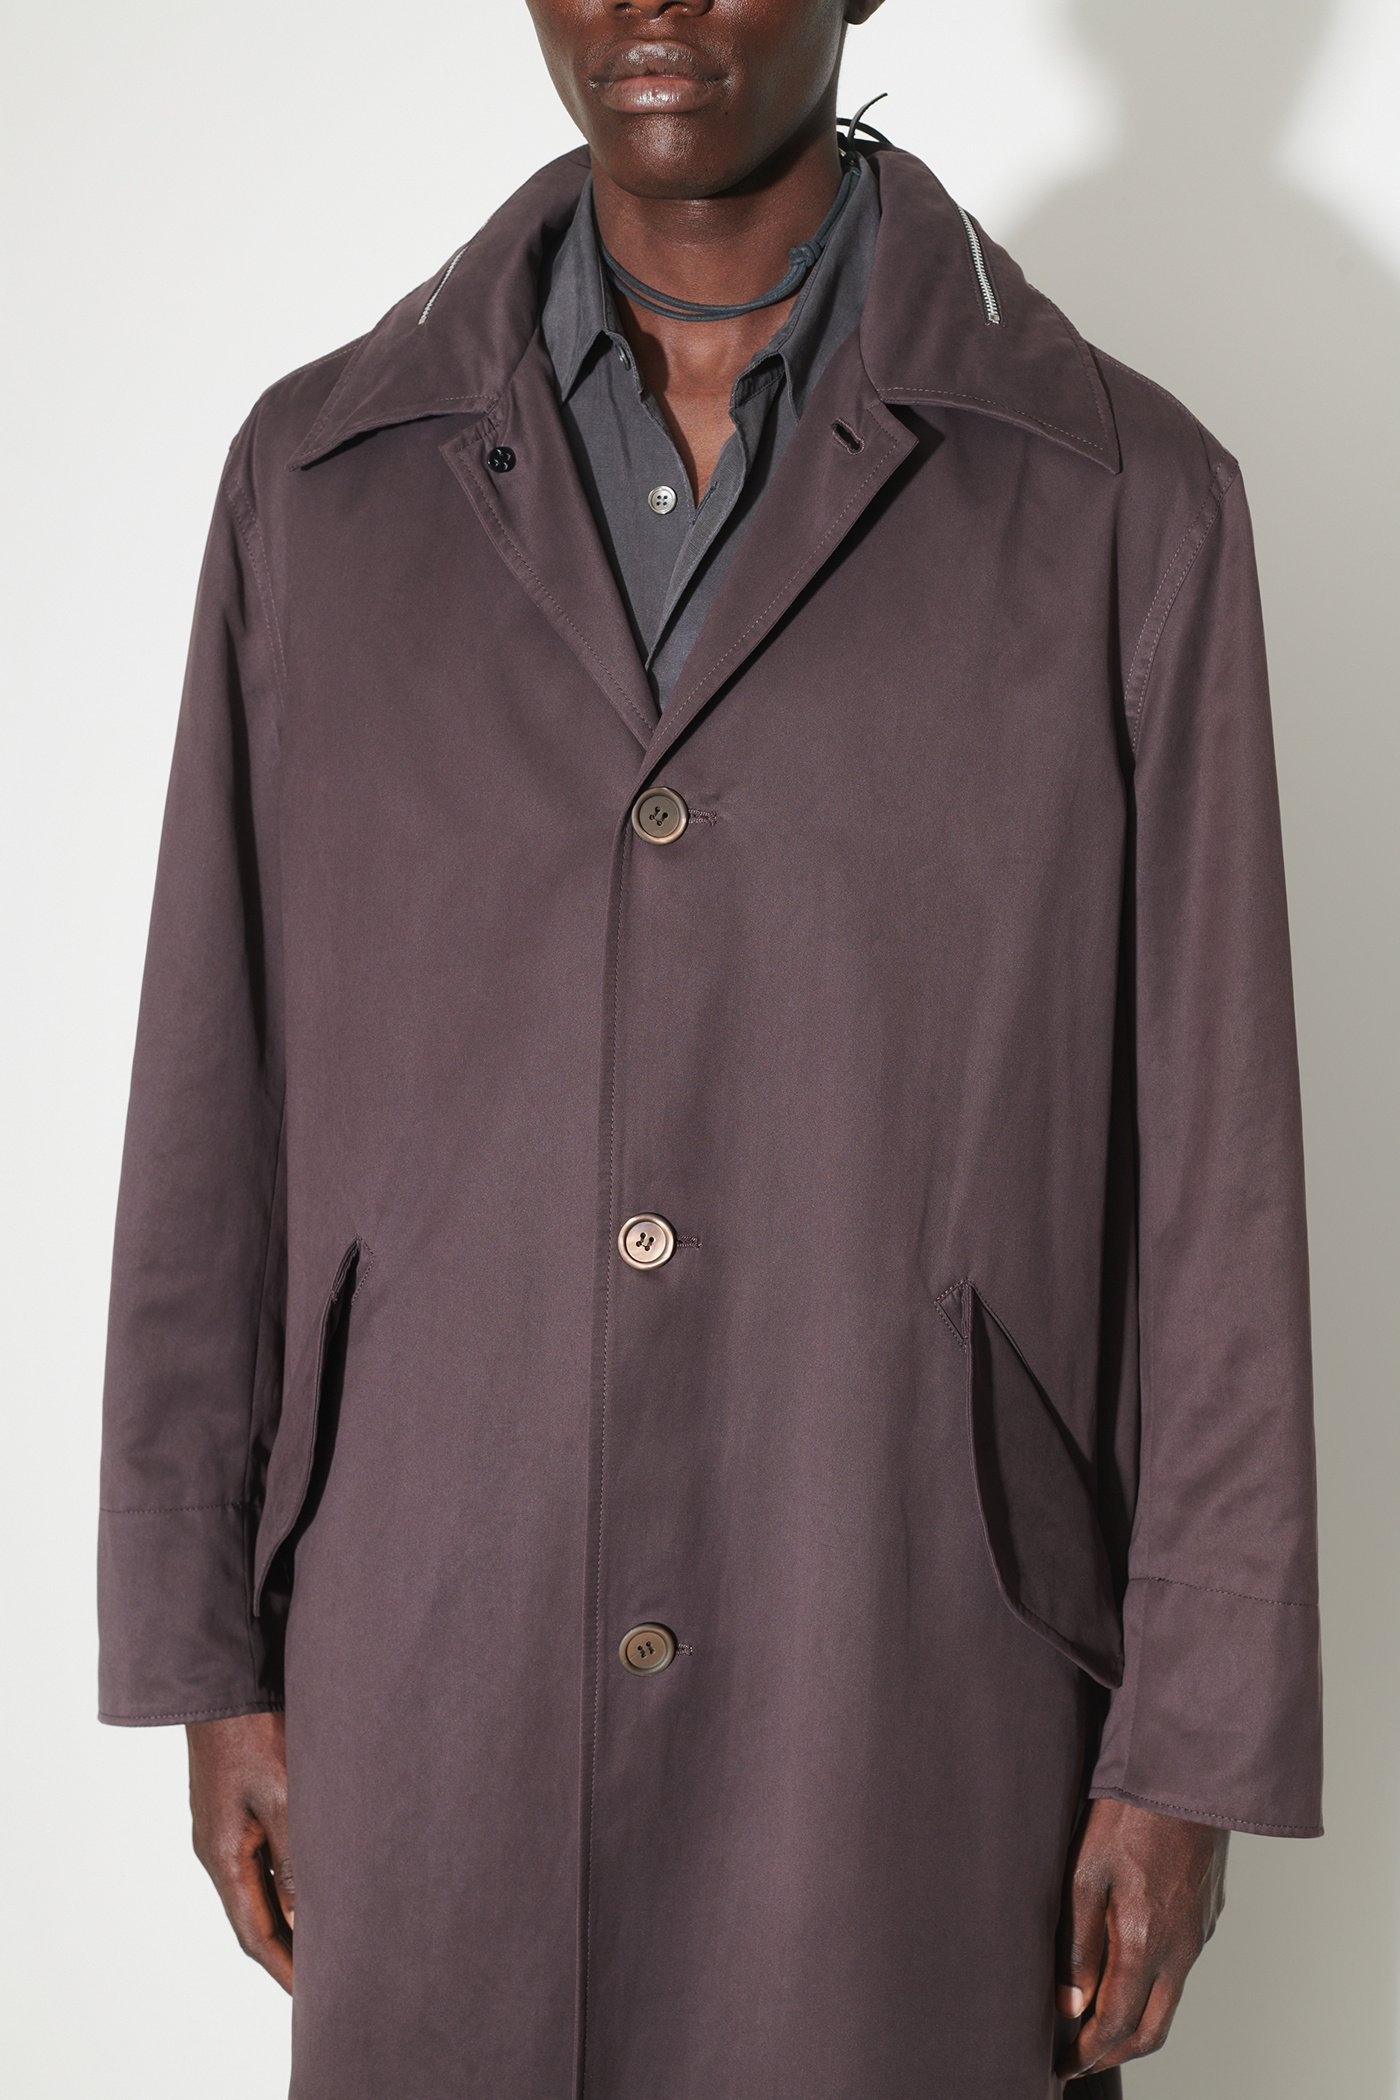 Emerge Coat Profound Brown Peached Tech - 2